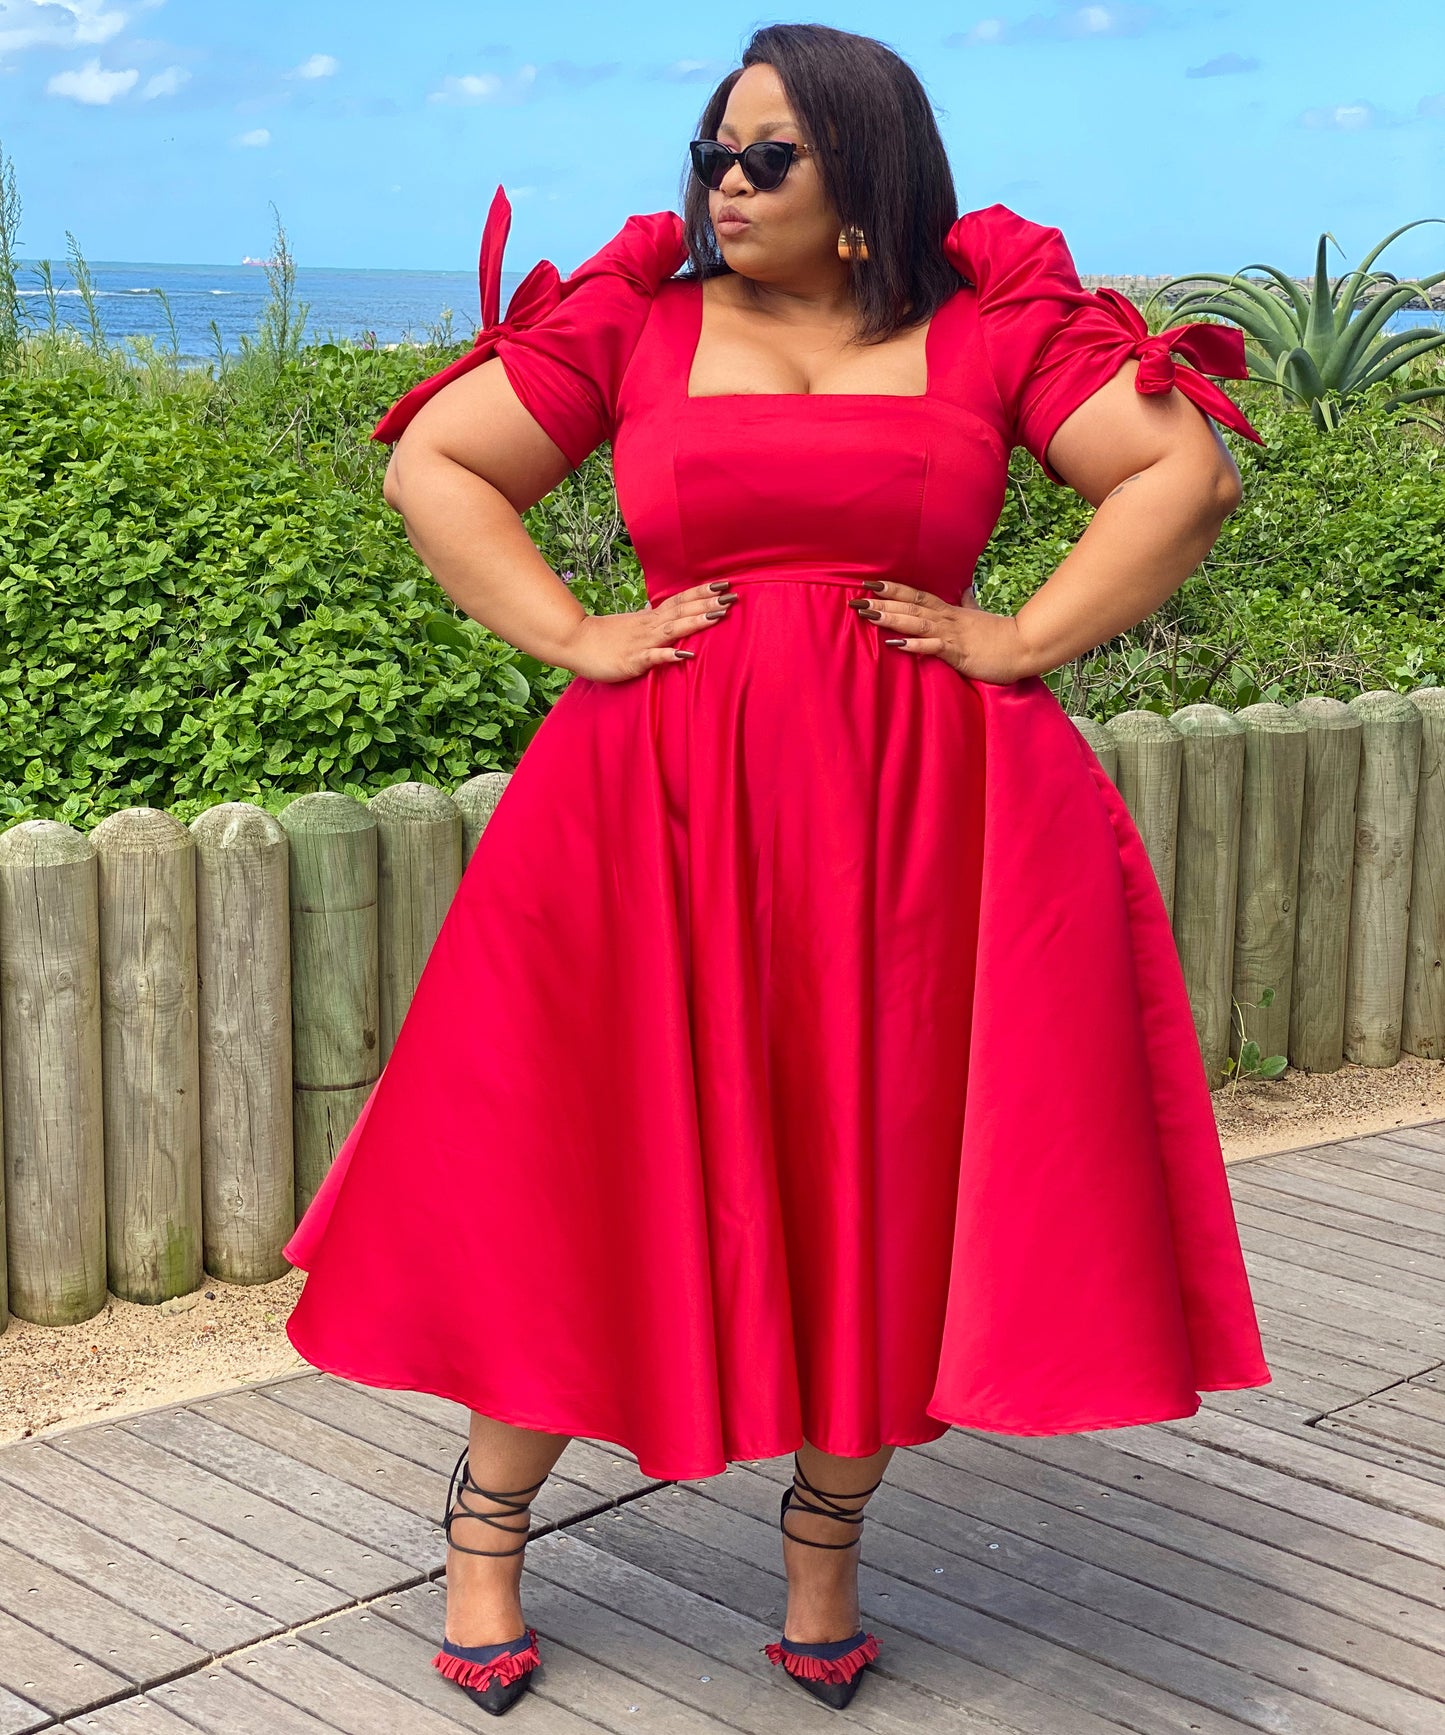 Red duchess dress (allow 3-5 days for completion of order)